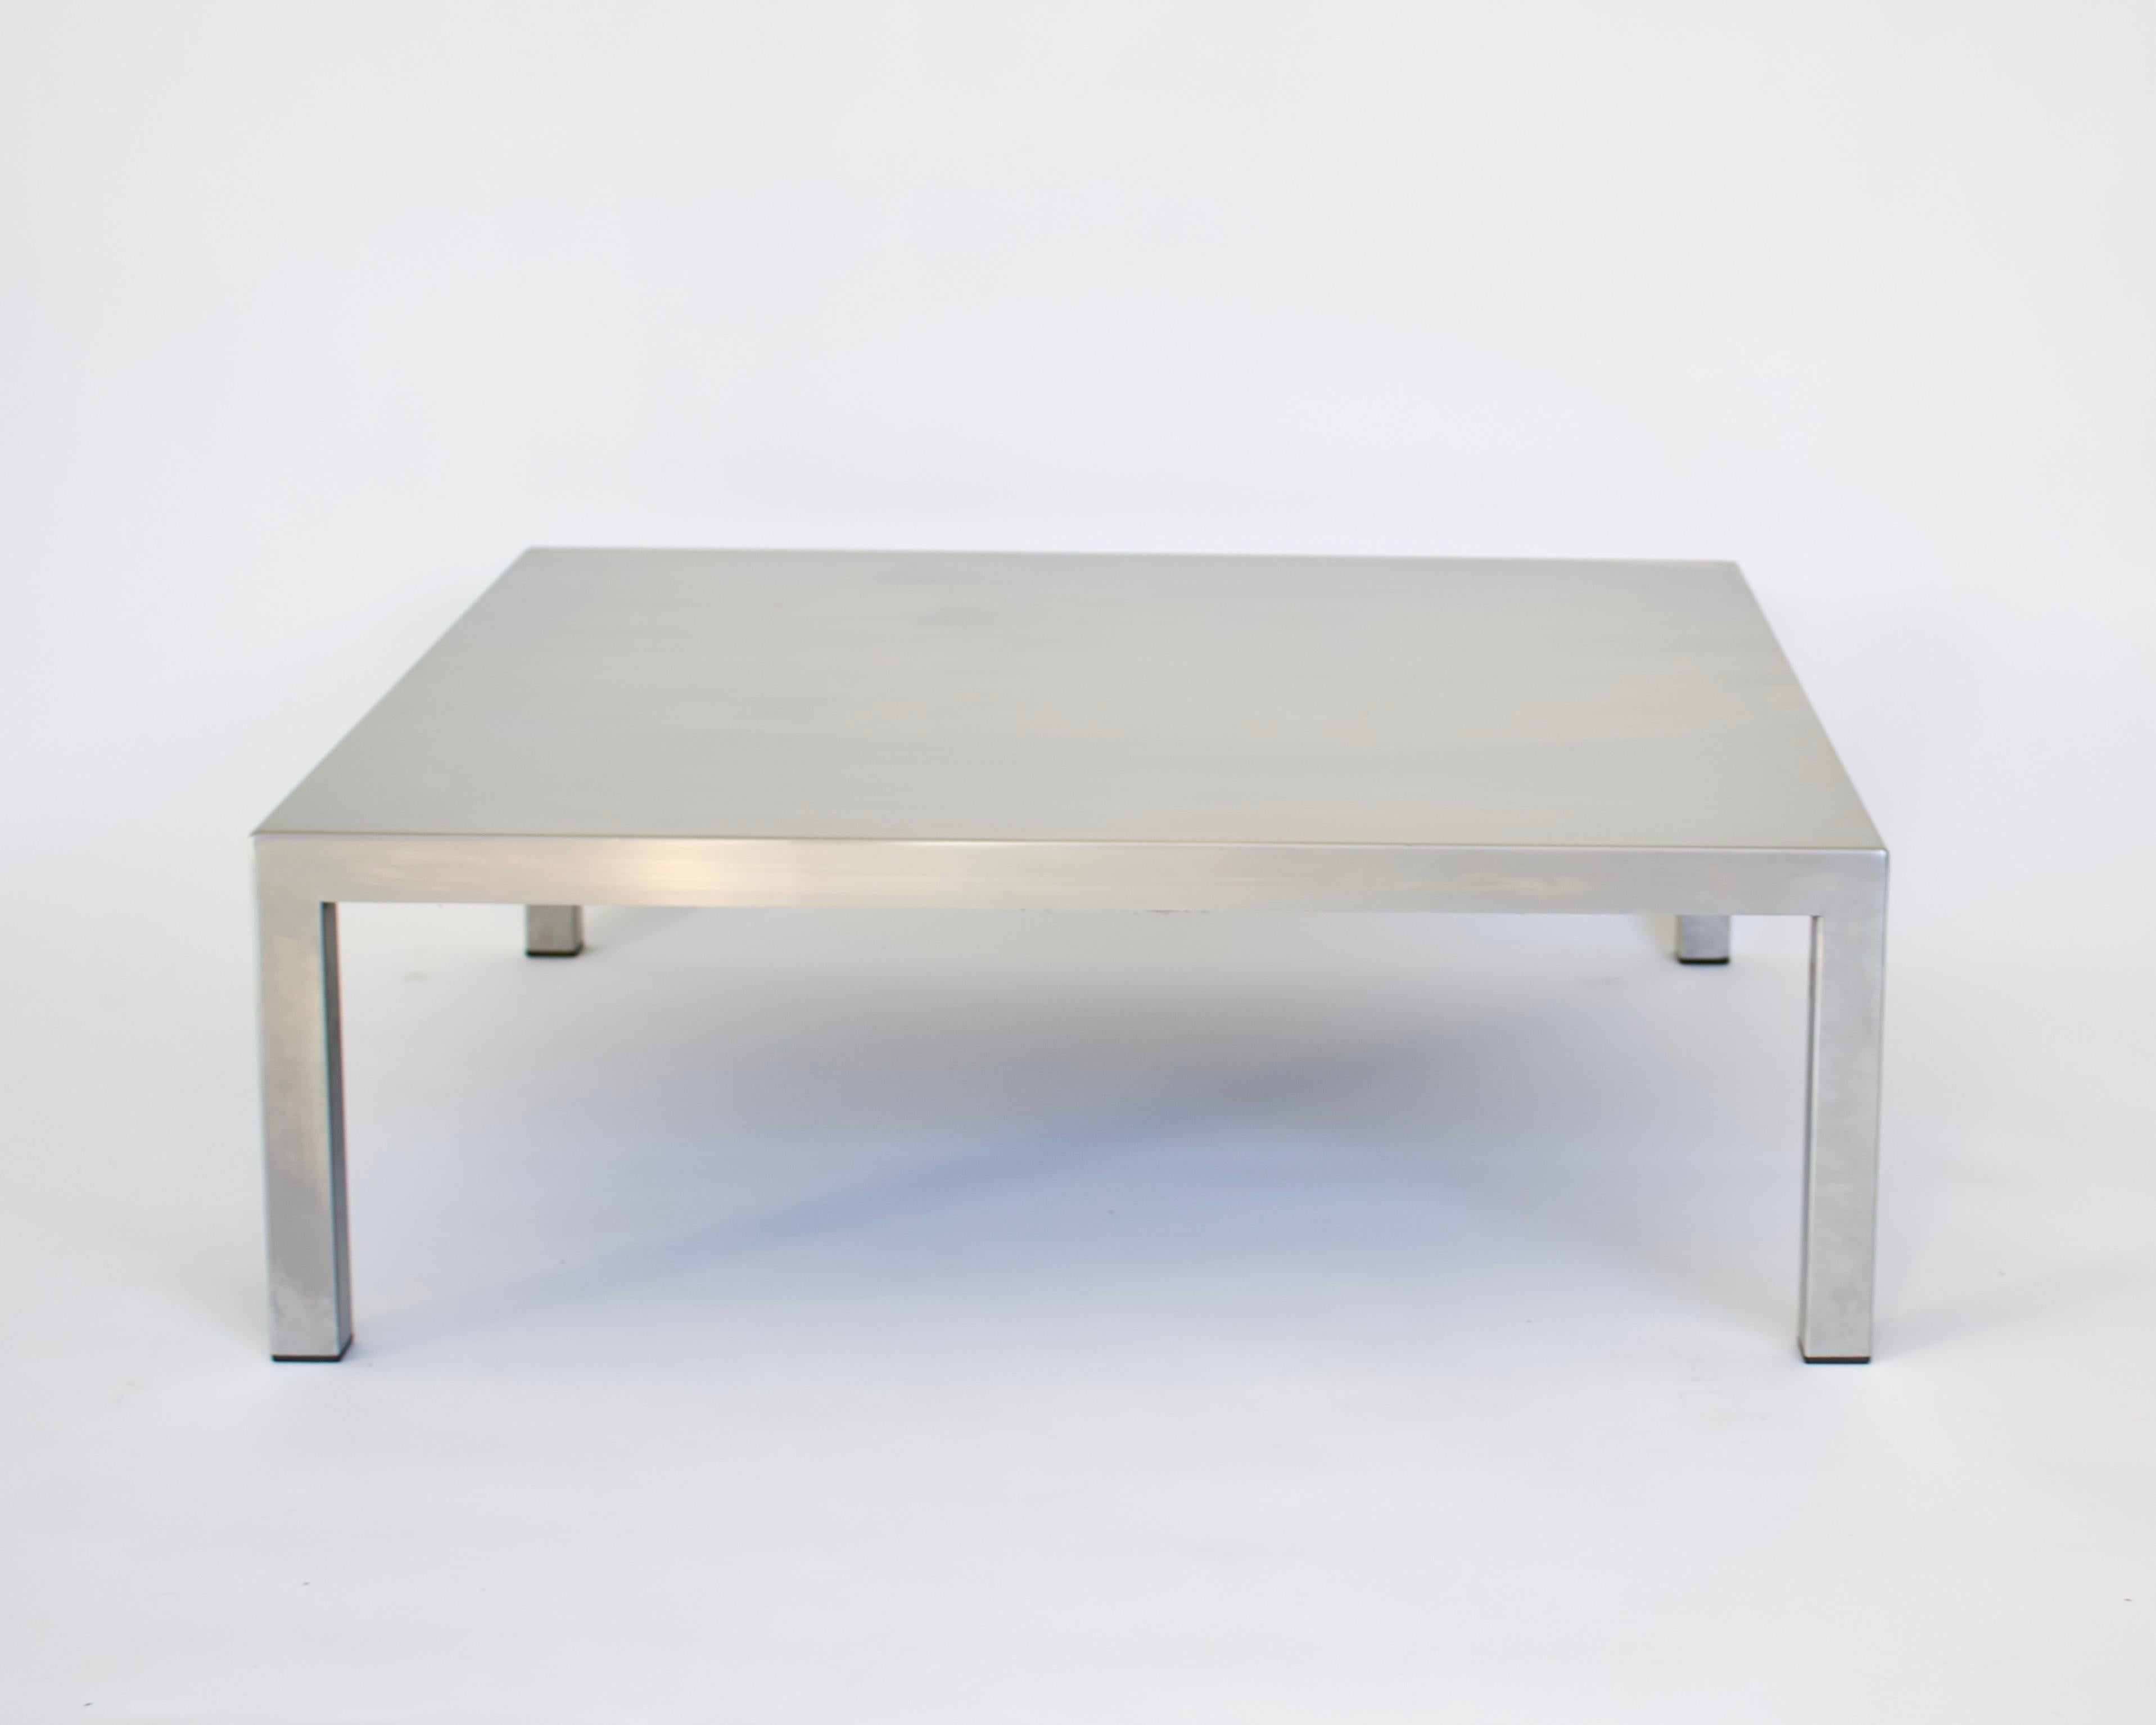 A matte stainless steel coffee square table by Maria Pergay for Creative Design Steel with Marina Varenne, 1970, Paris. The designers iconic use of this material is displayed in one if her most simple minimalist designs.
Minimalist design and of the